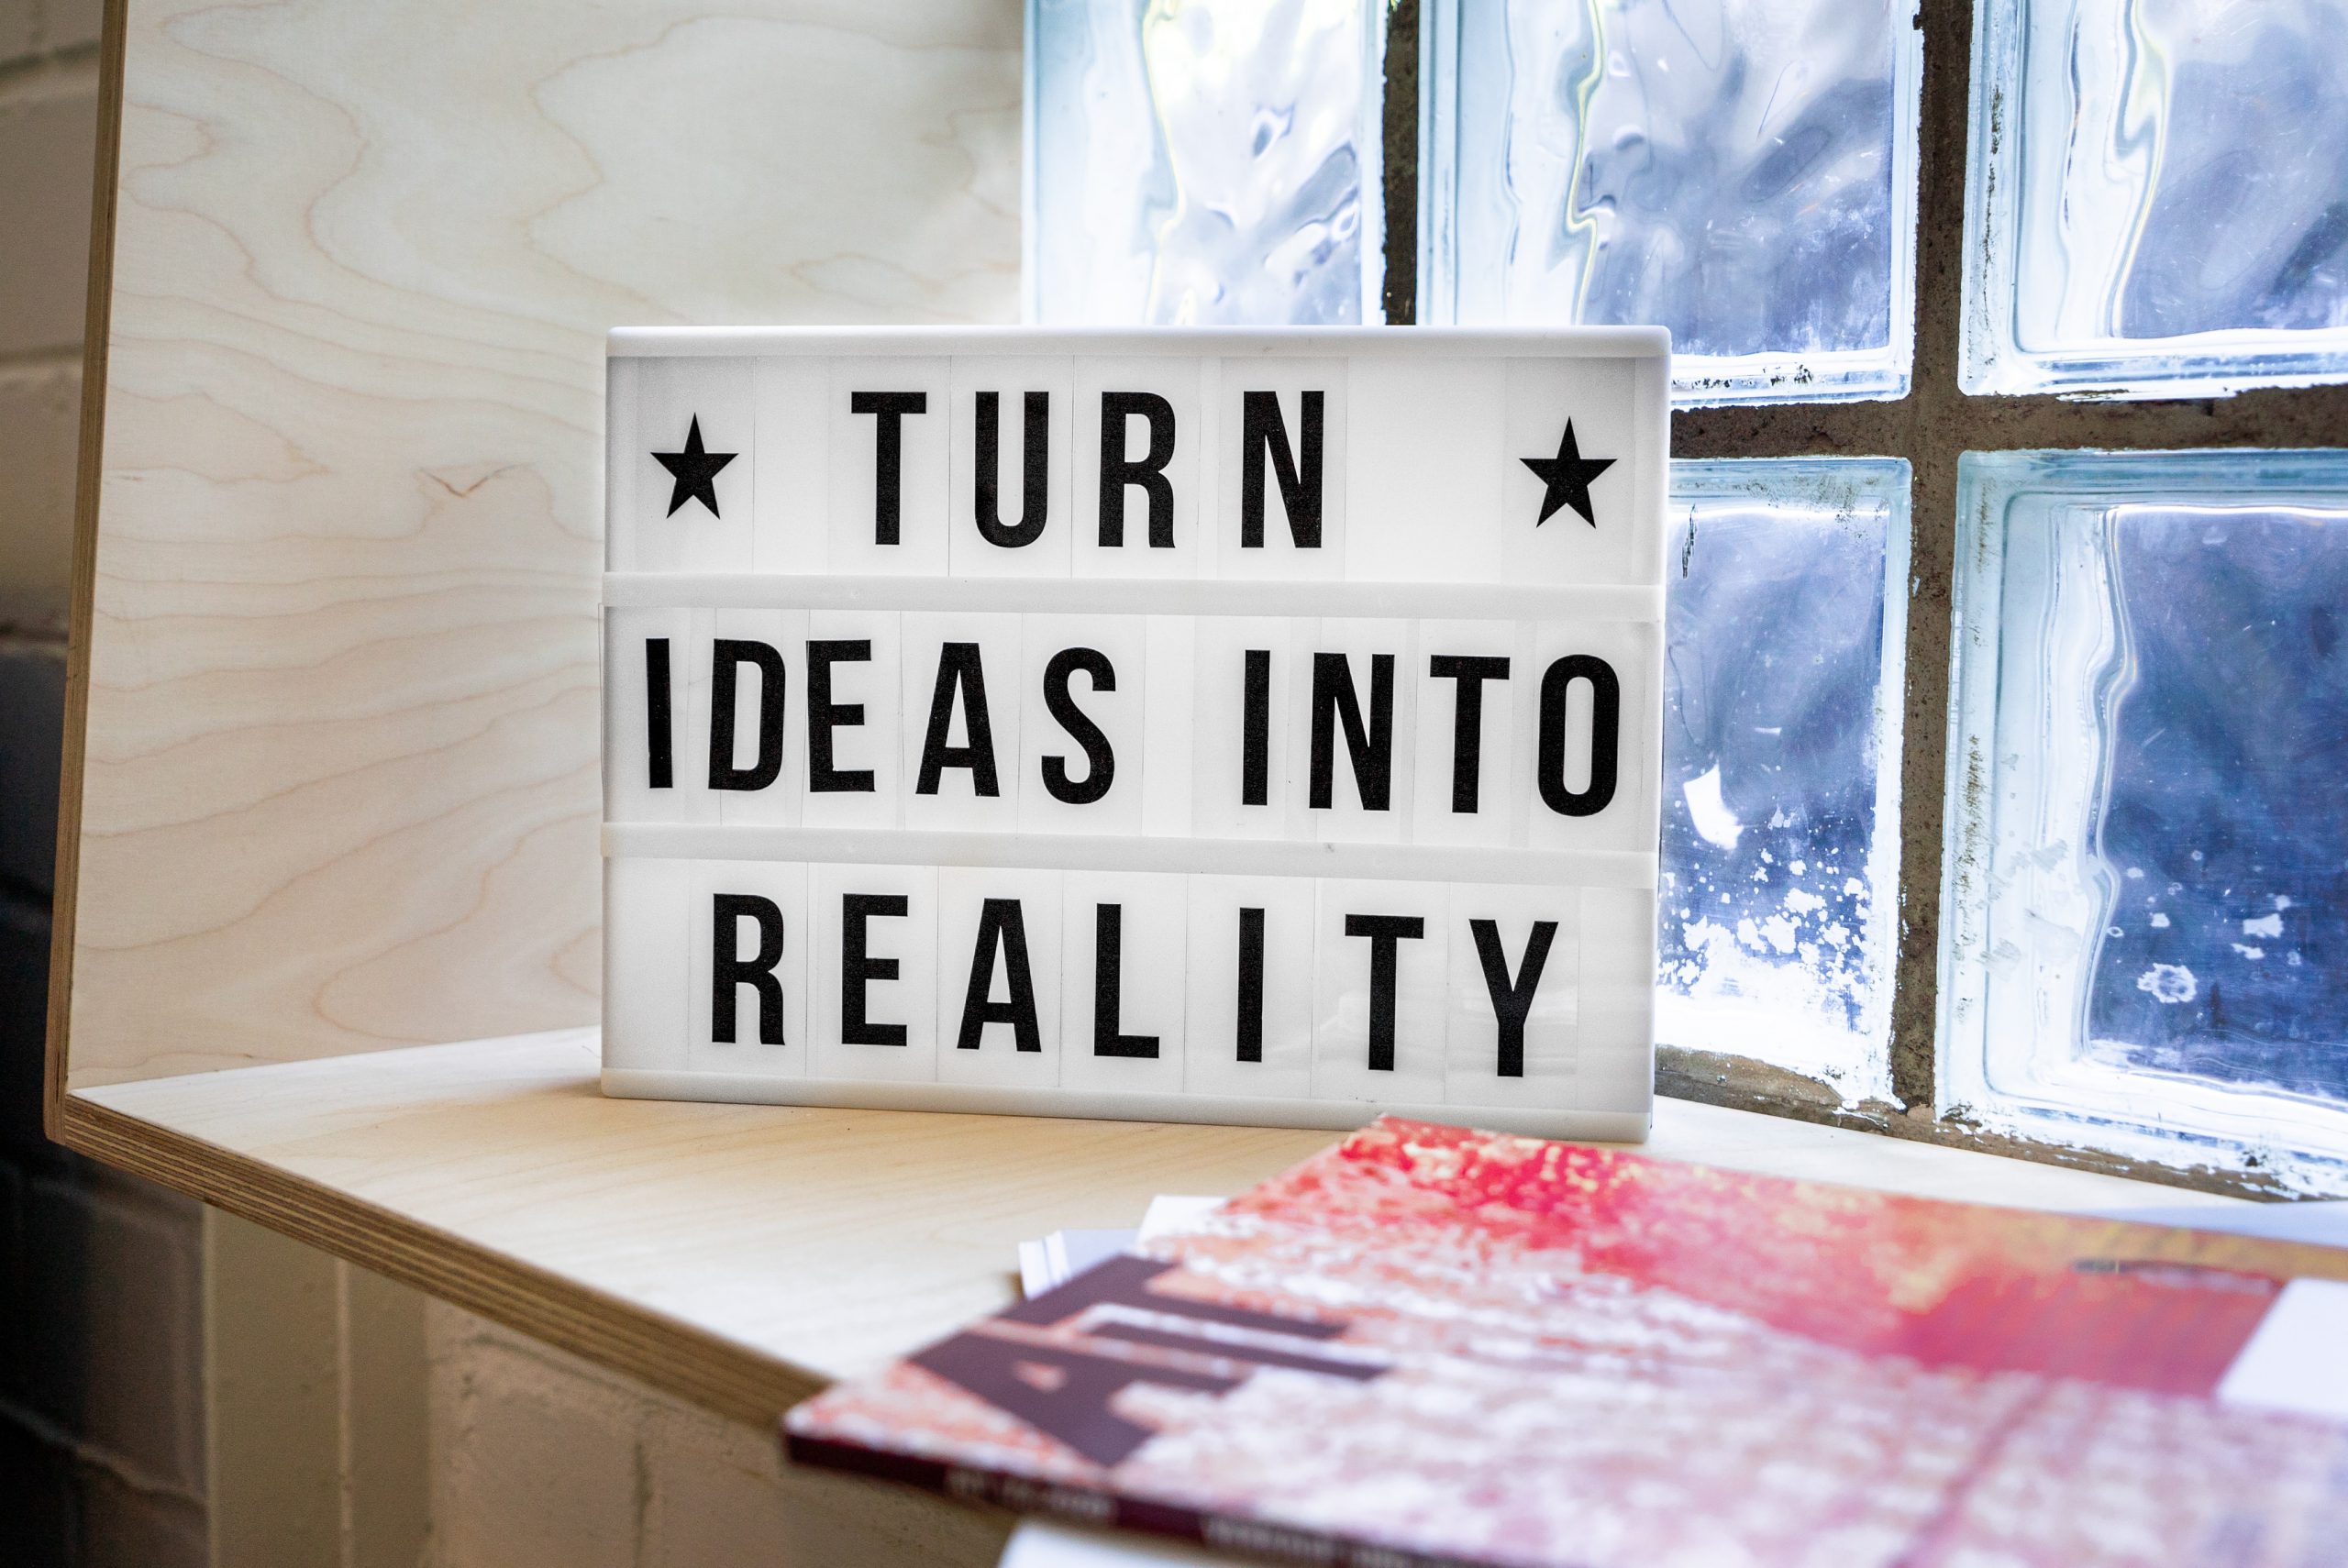 white and black wooden quote board with inspirational quote "turn ideas into reality"